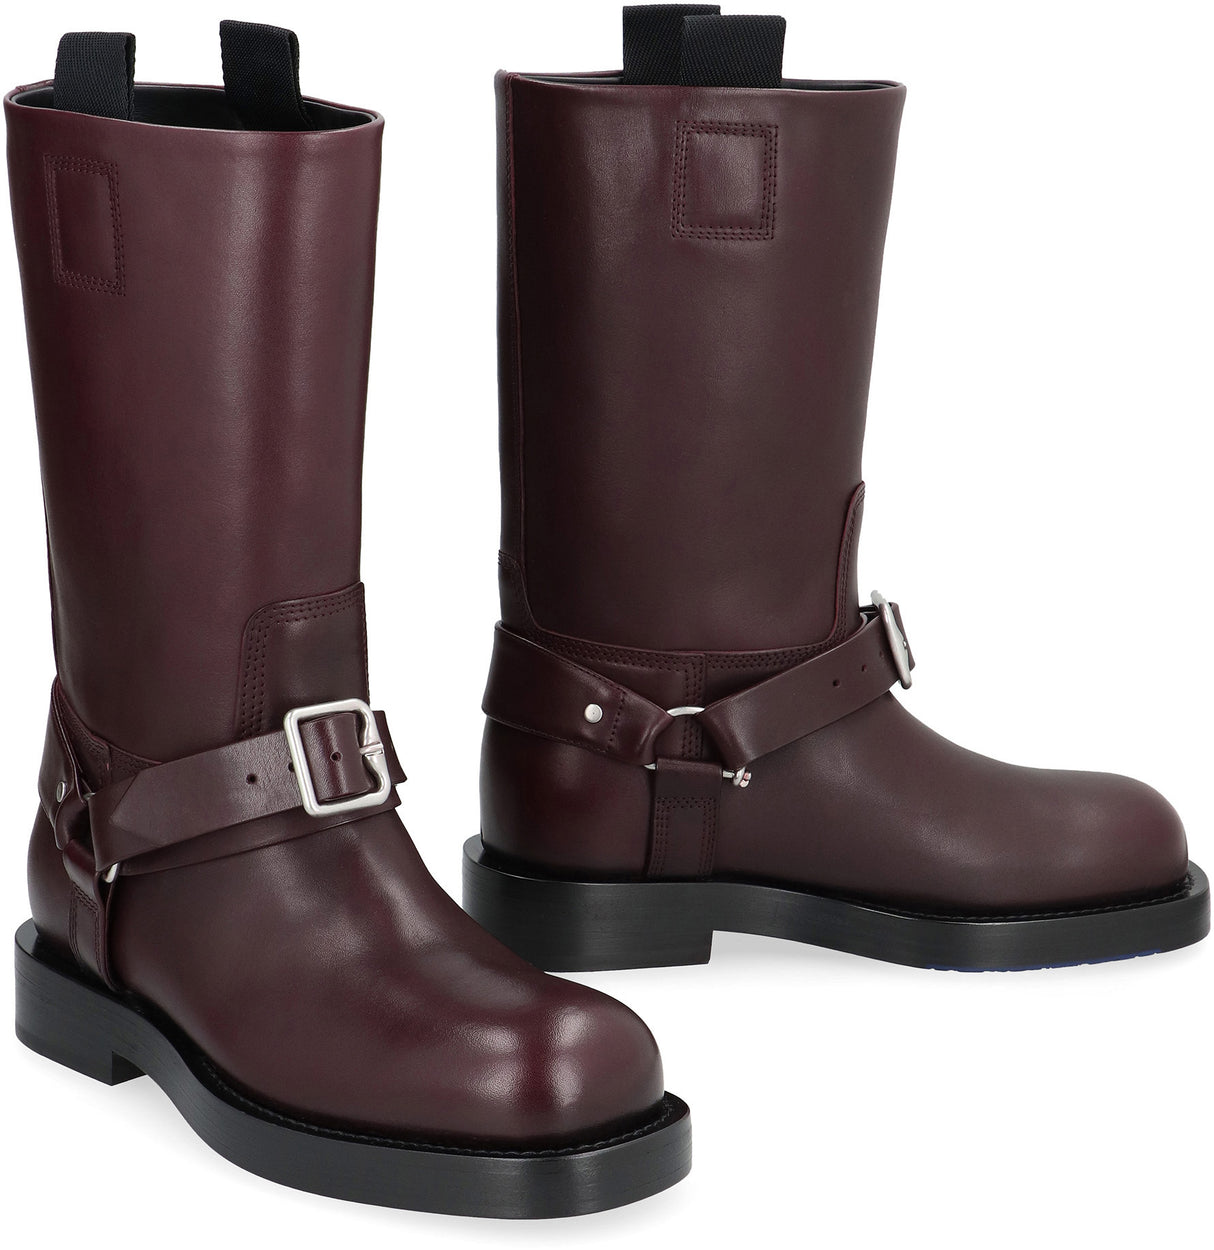 BURBERRY Burgundy Leather Women's Boots for FW23 Season